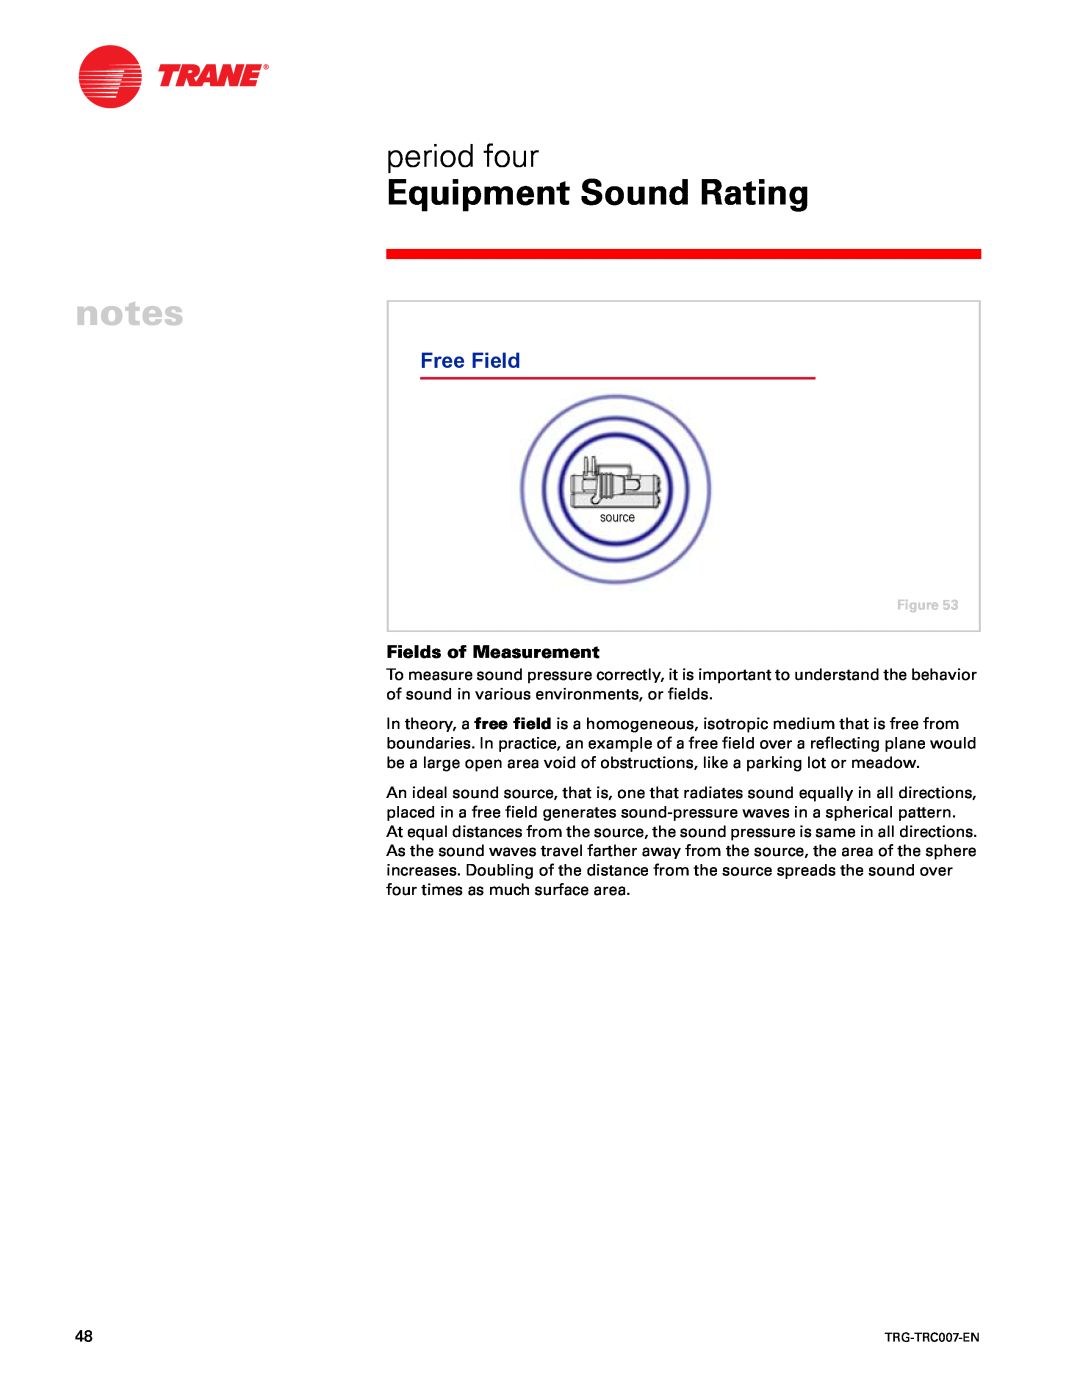 Trane TRG-TRC007-EN manual period four, Free Field, Equipment Sound Rating, Fields of Measurement 